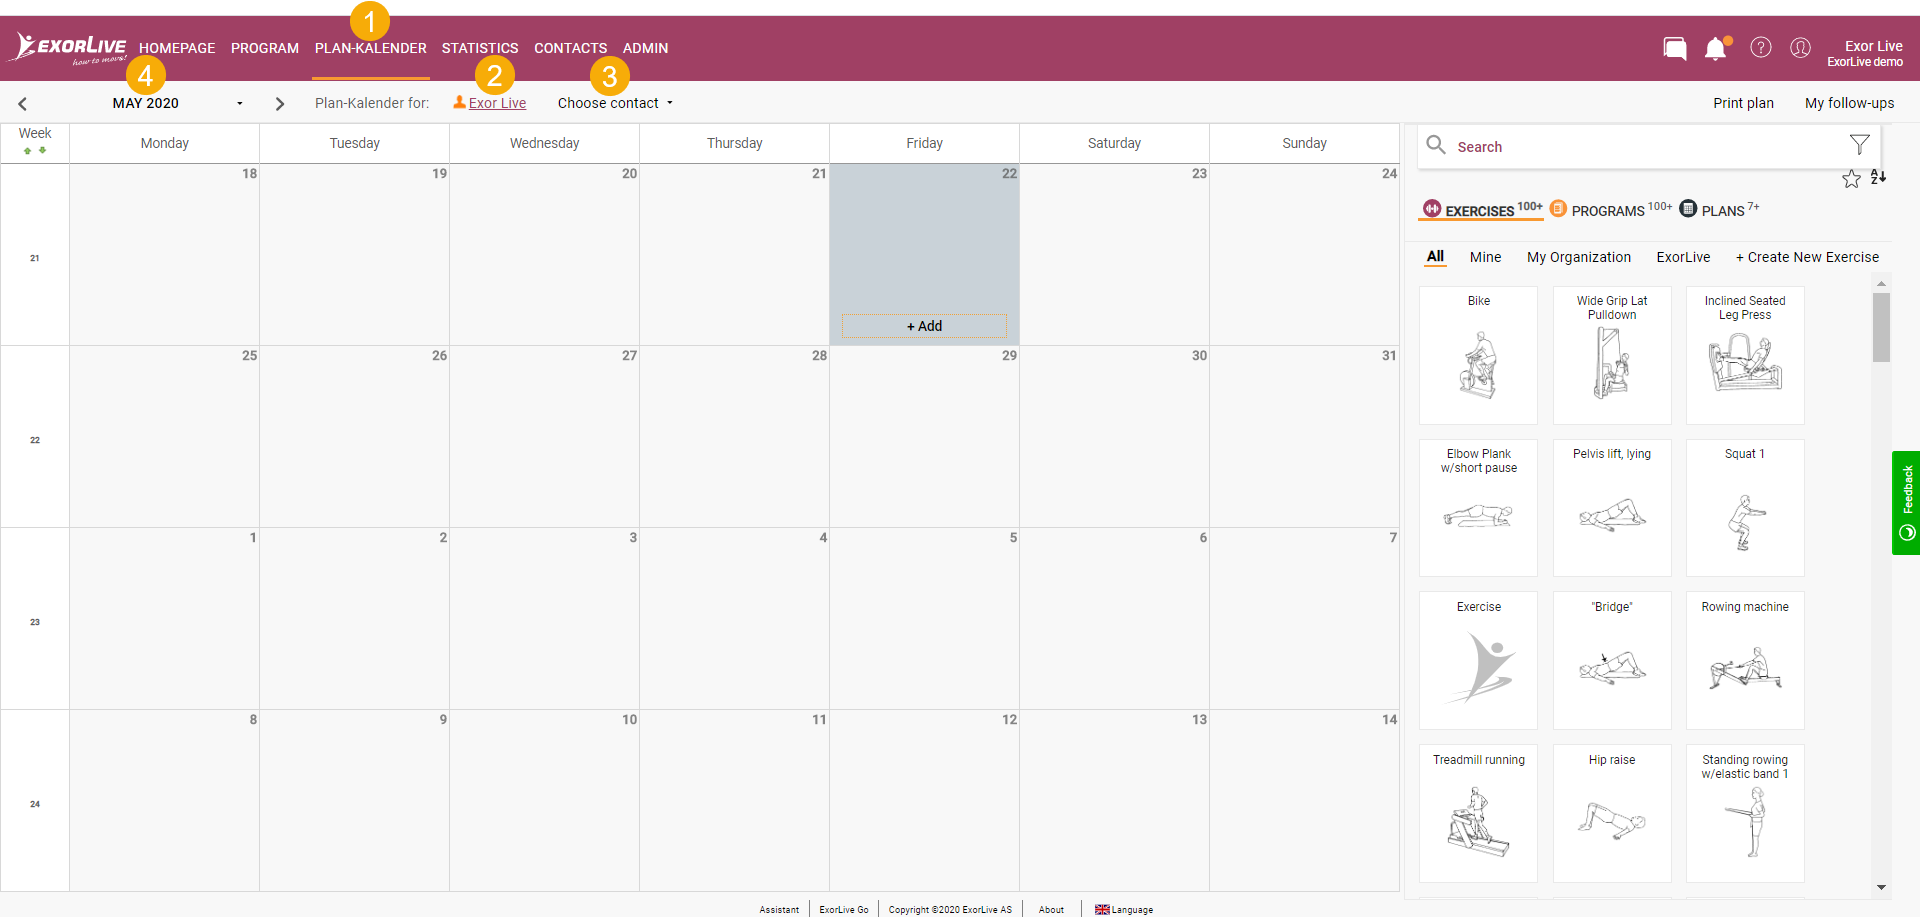 Finding_and_adding_exercises__programs_and_plans_to_the_calendar_Engelsk_1.png